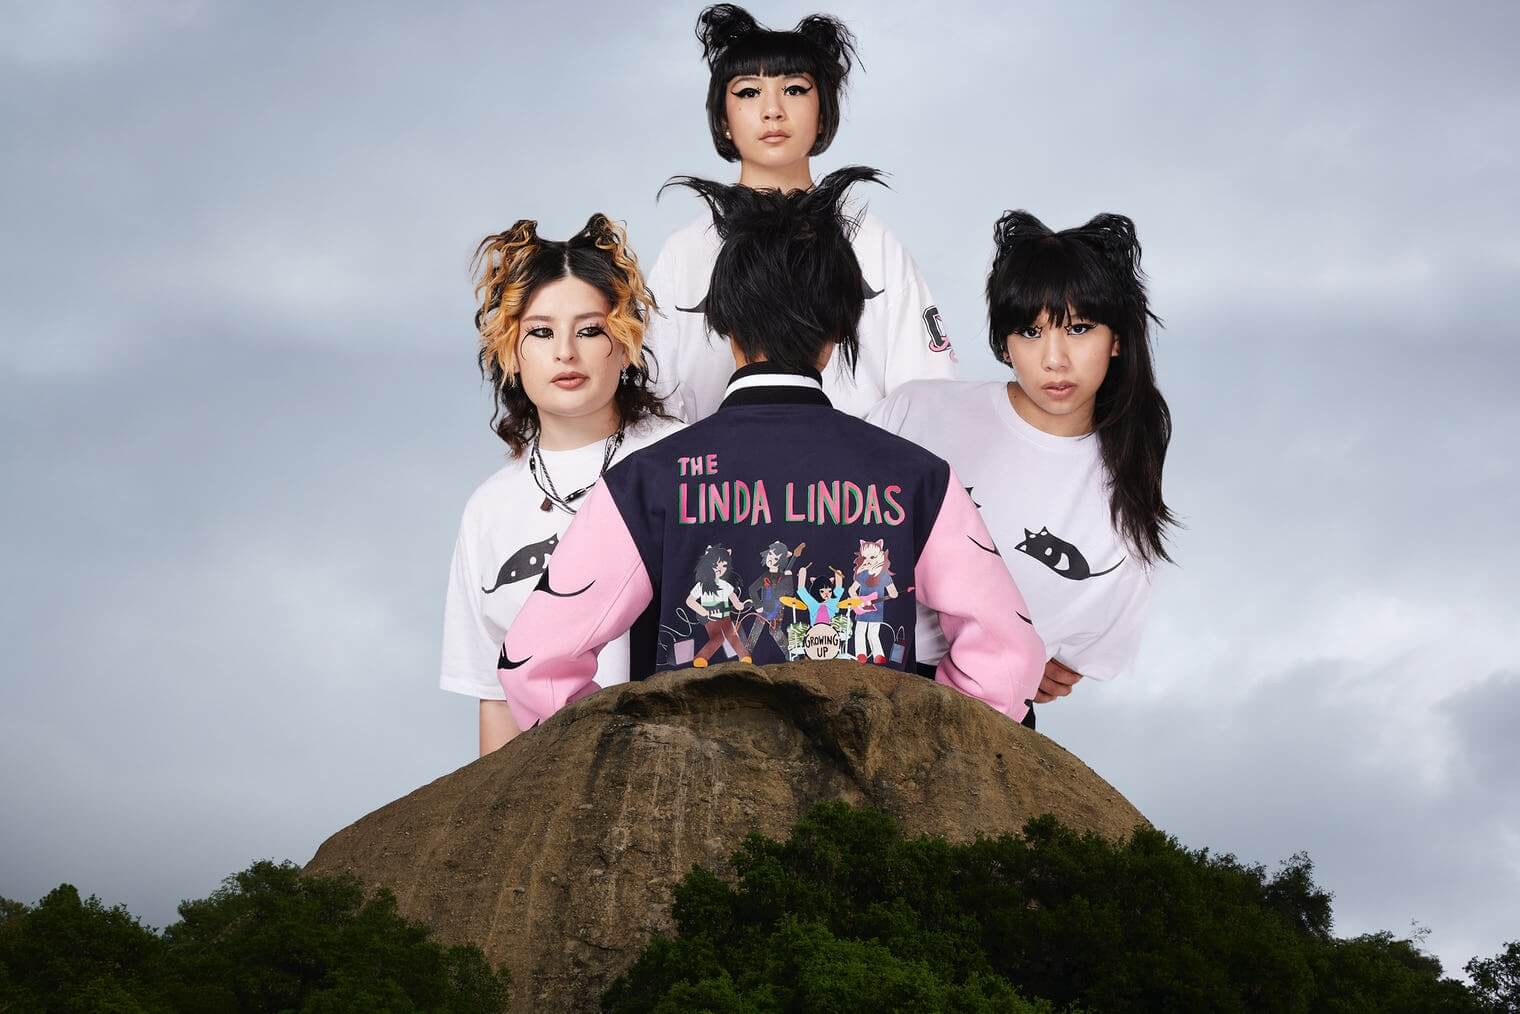 Opening Ceremony Recruits The Linda Lindas For New Collab